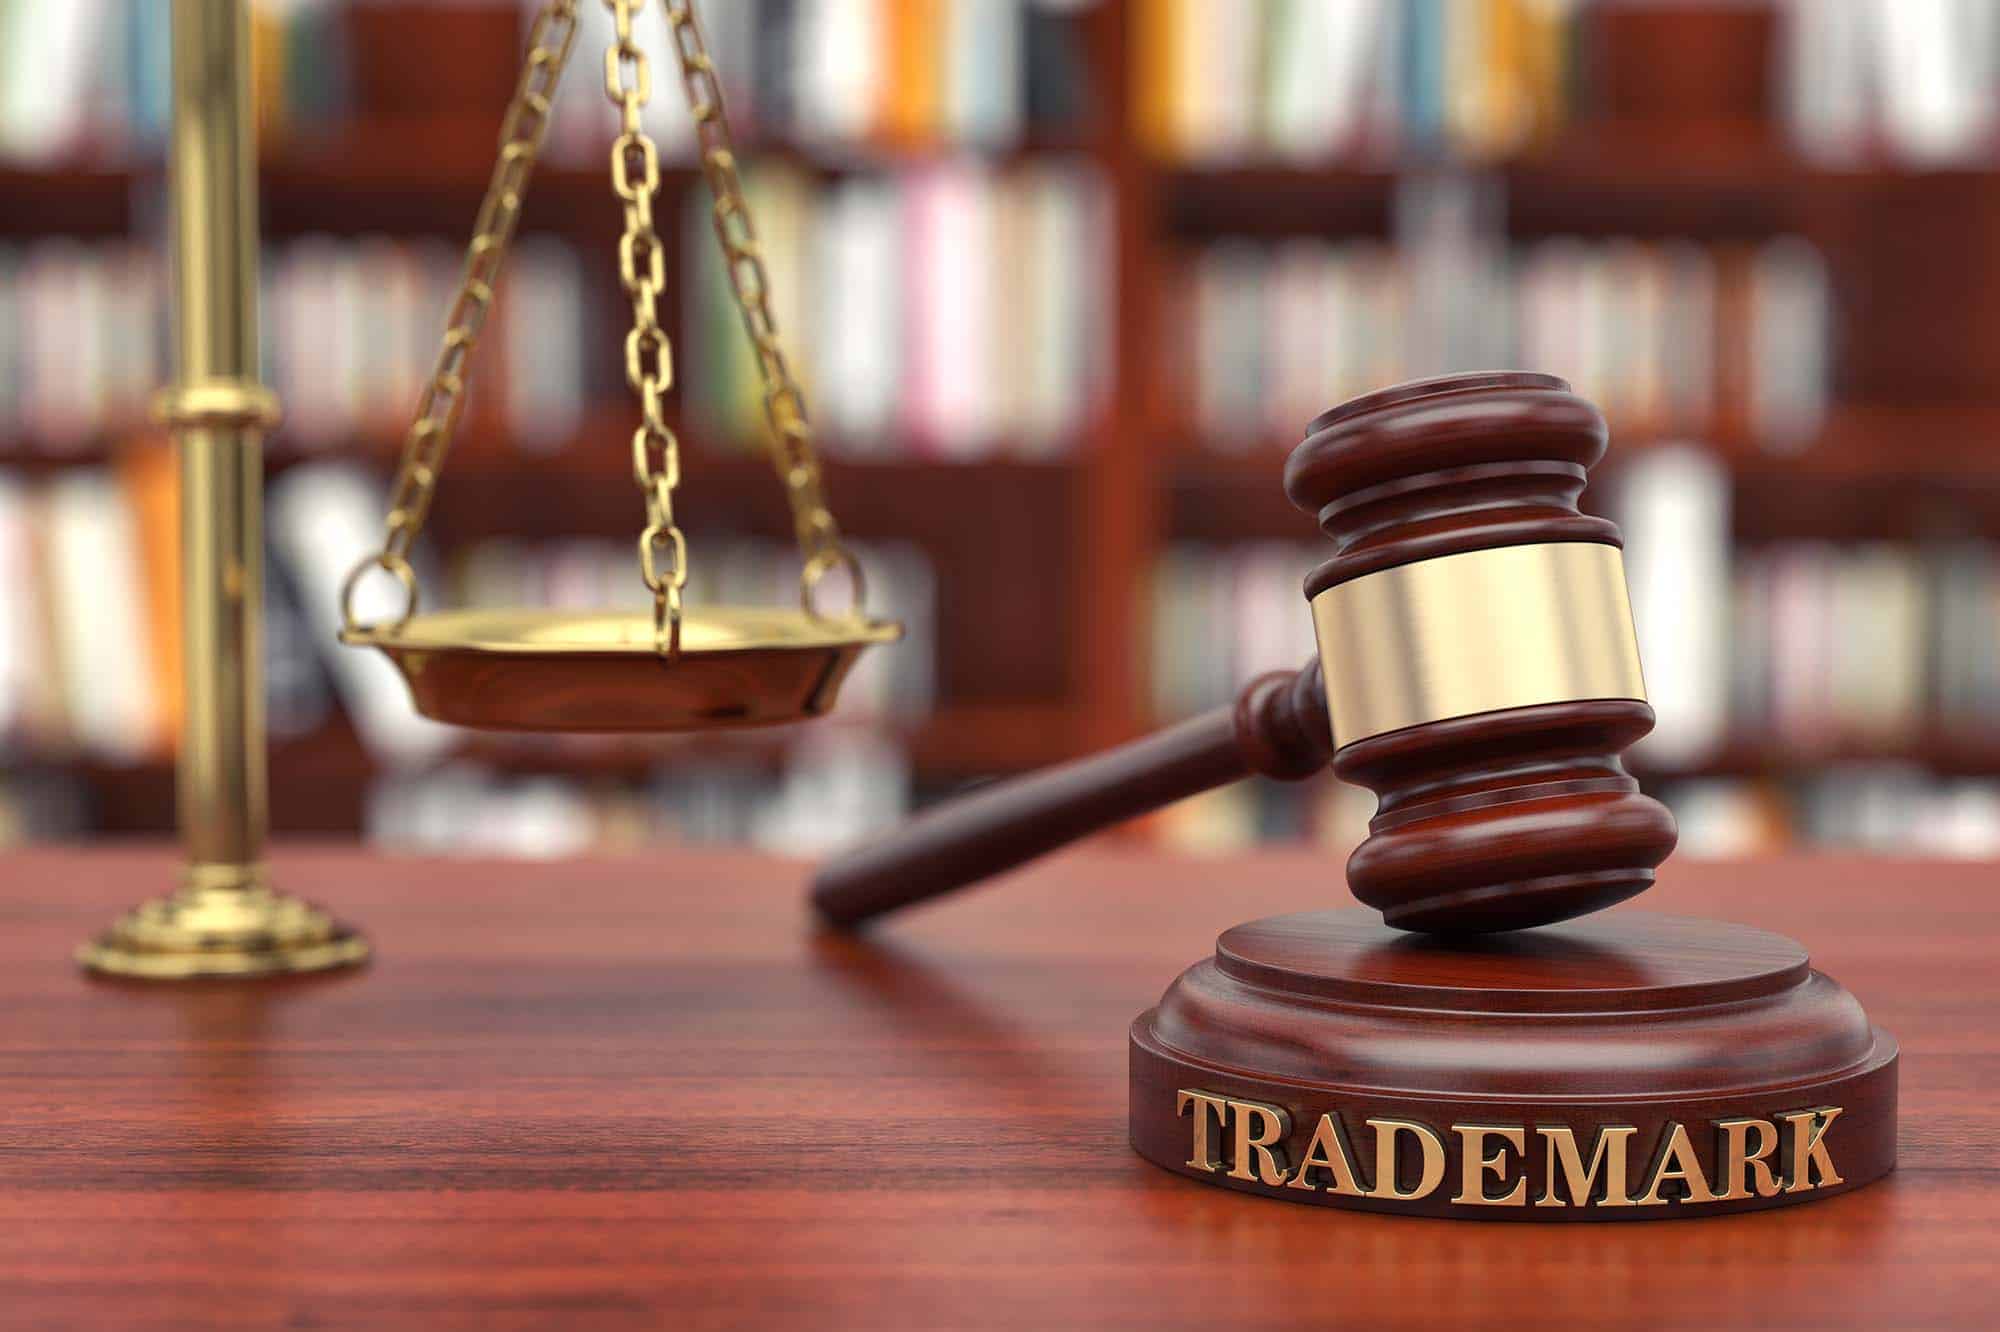 Trademark law must be considered when registering your online business - or any business